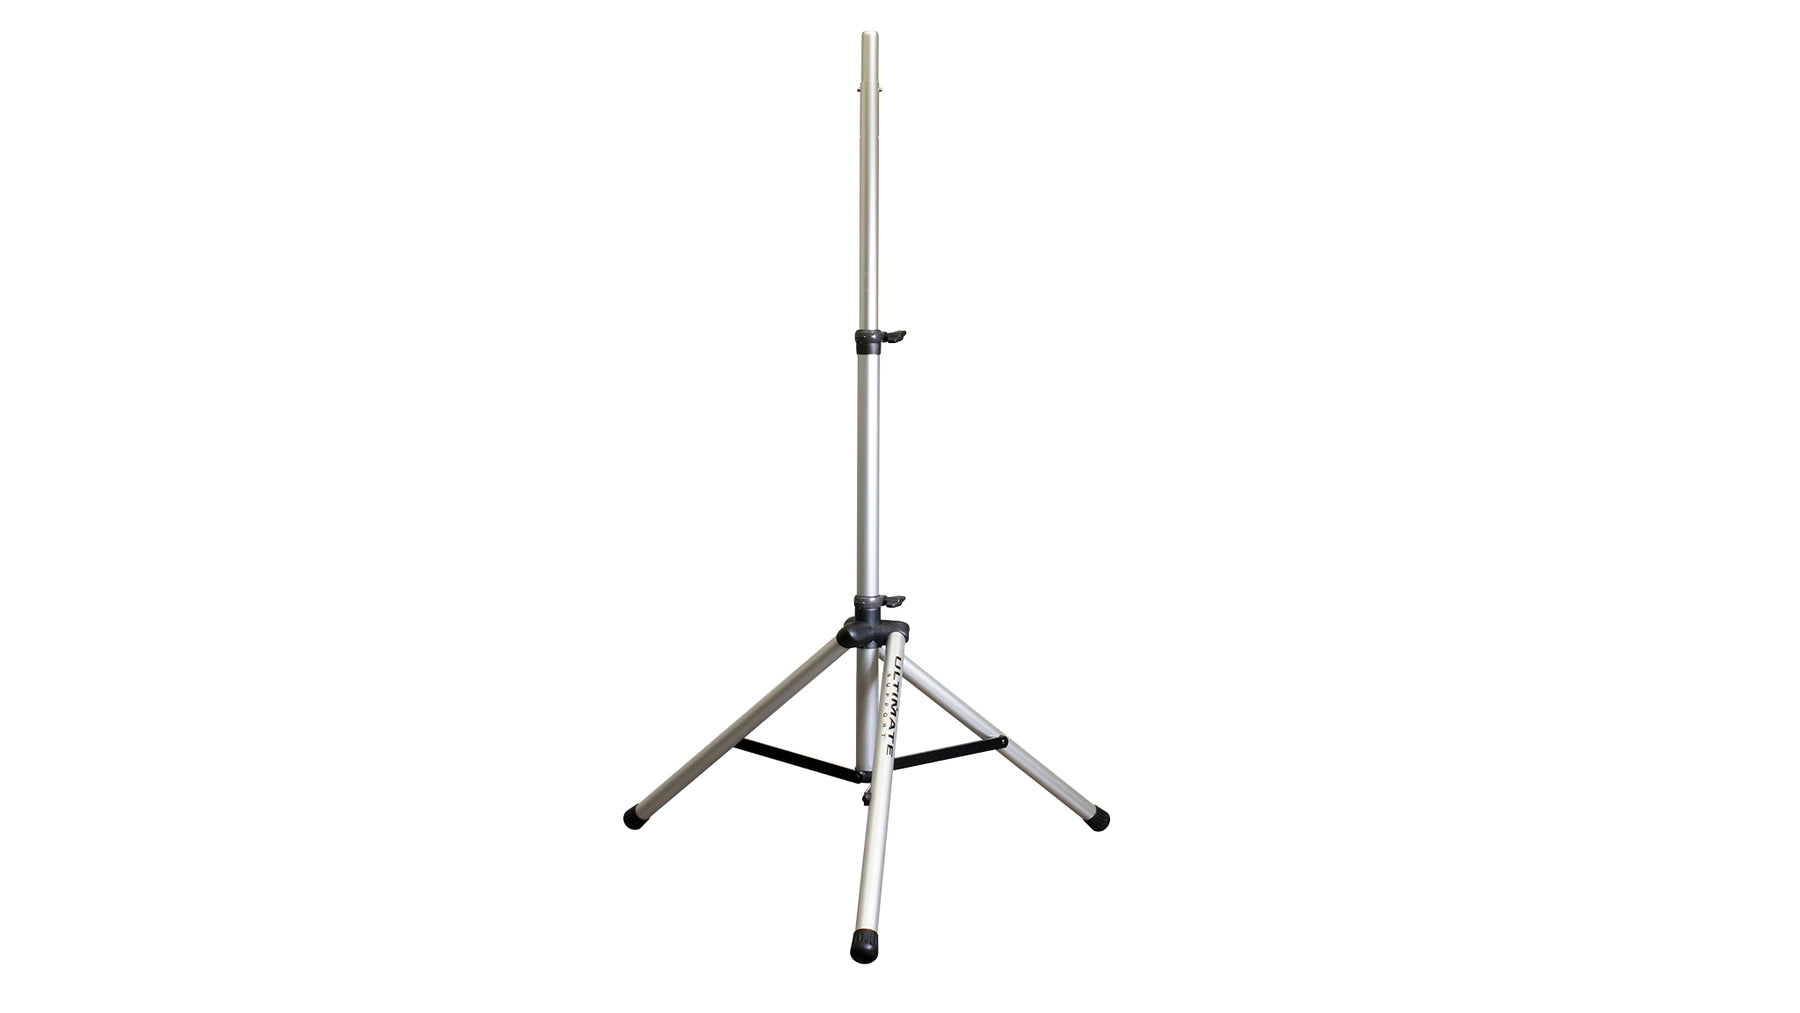 Ultimate Support TS-80B Black Speaker Stand